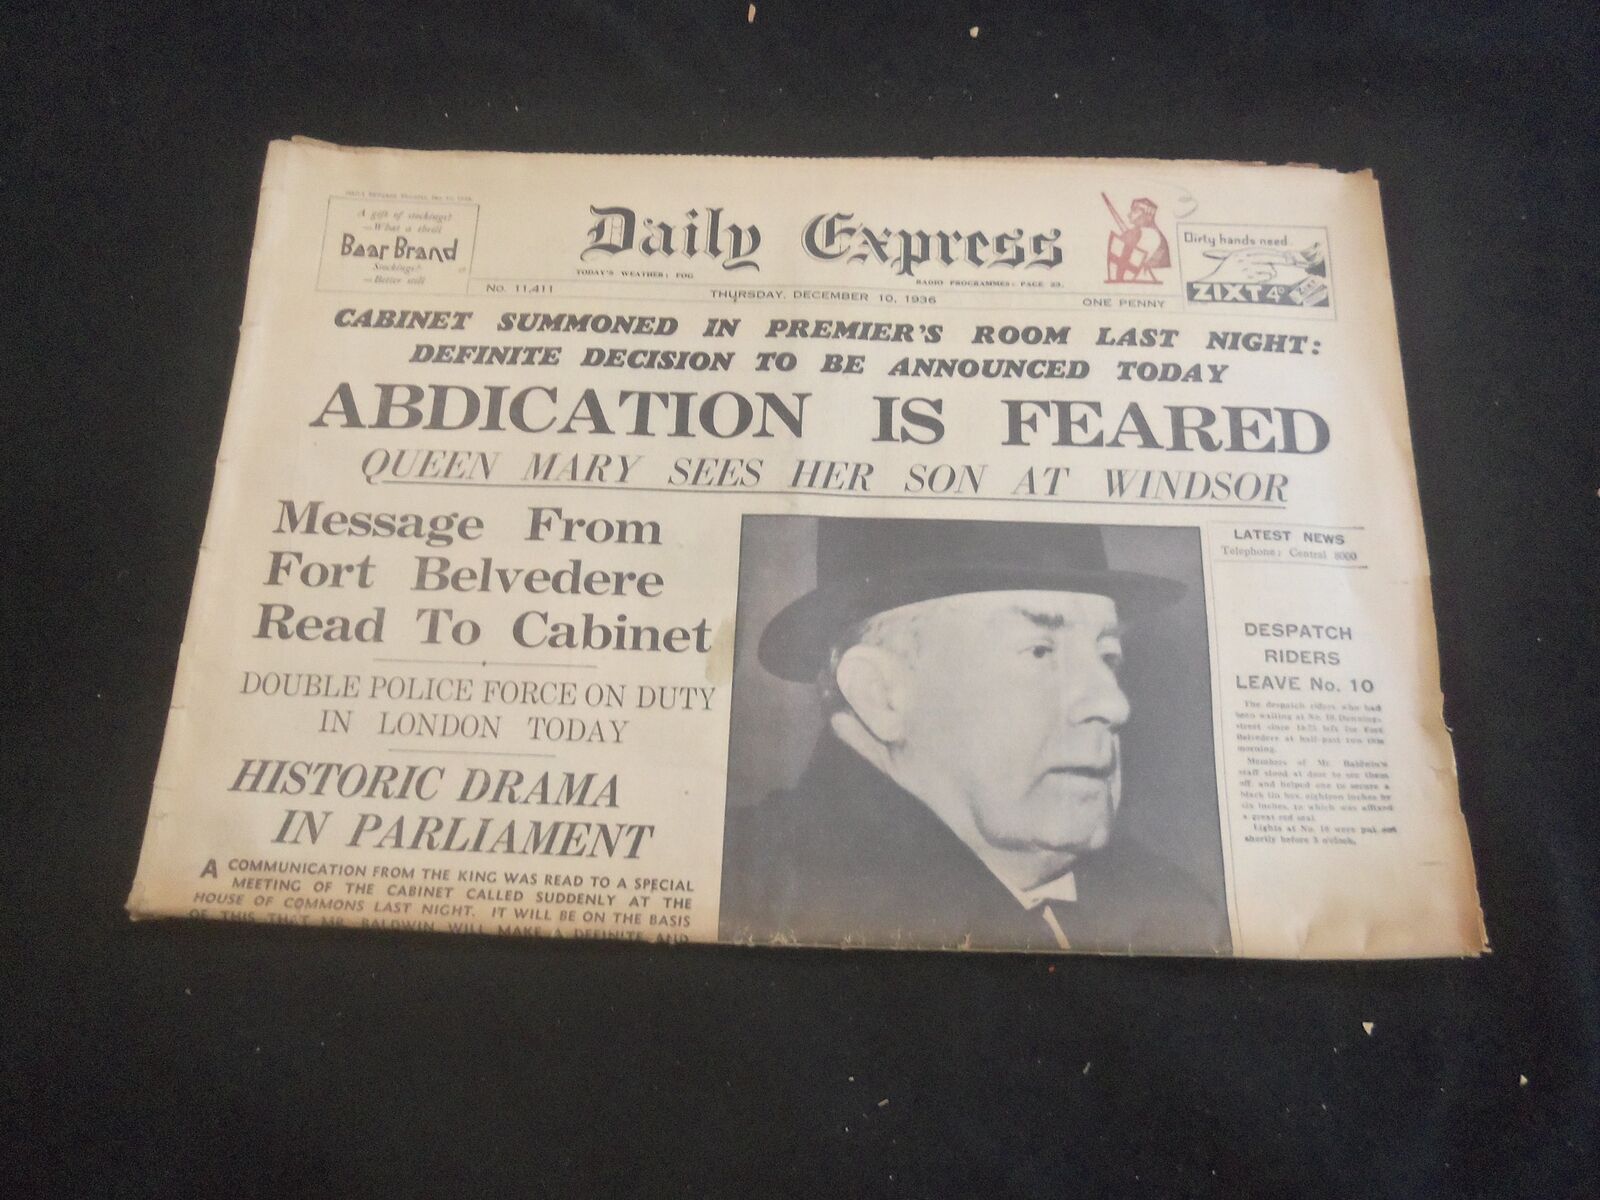 1936 DEC 10 DAILY EXPRESS NEWSPAPER - LONDON - ABDICATION IS FEARED - NP 5755